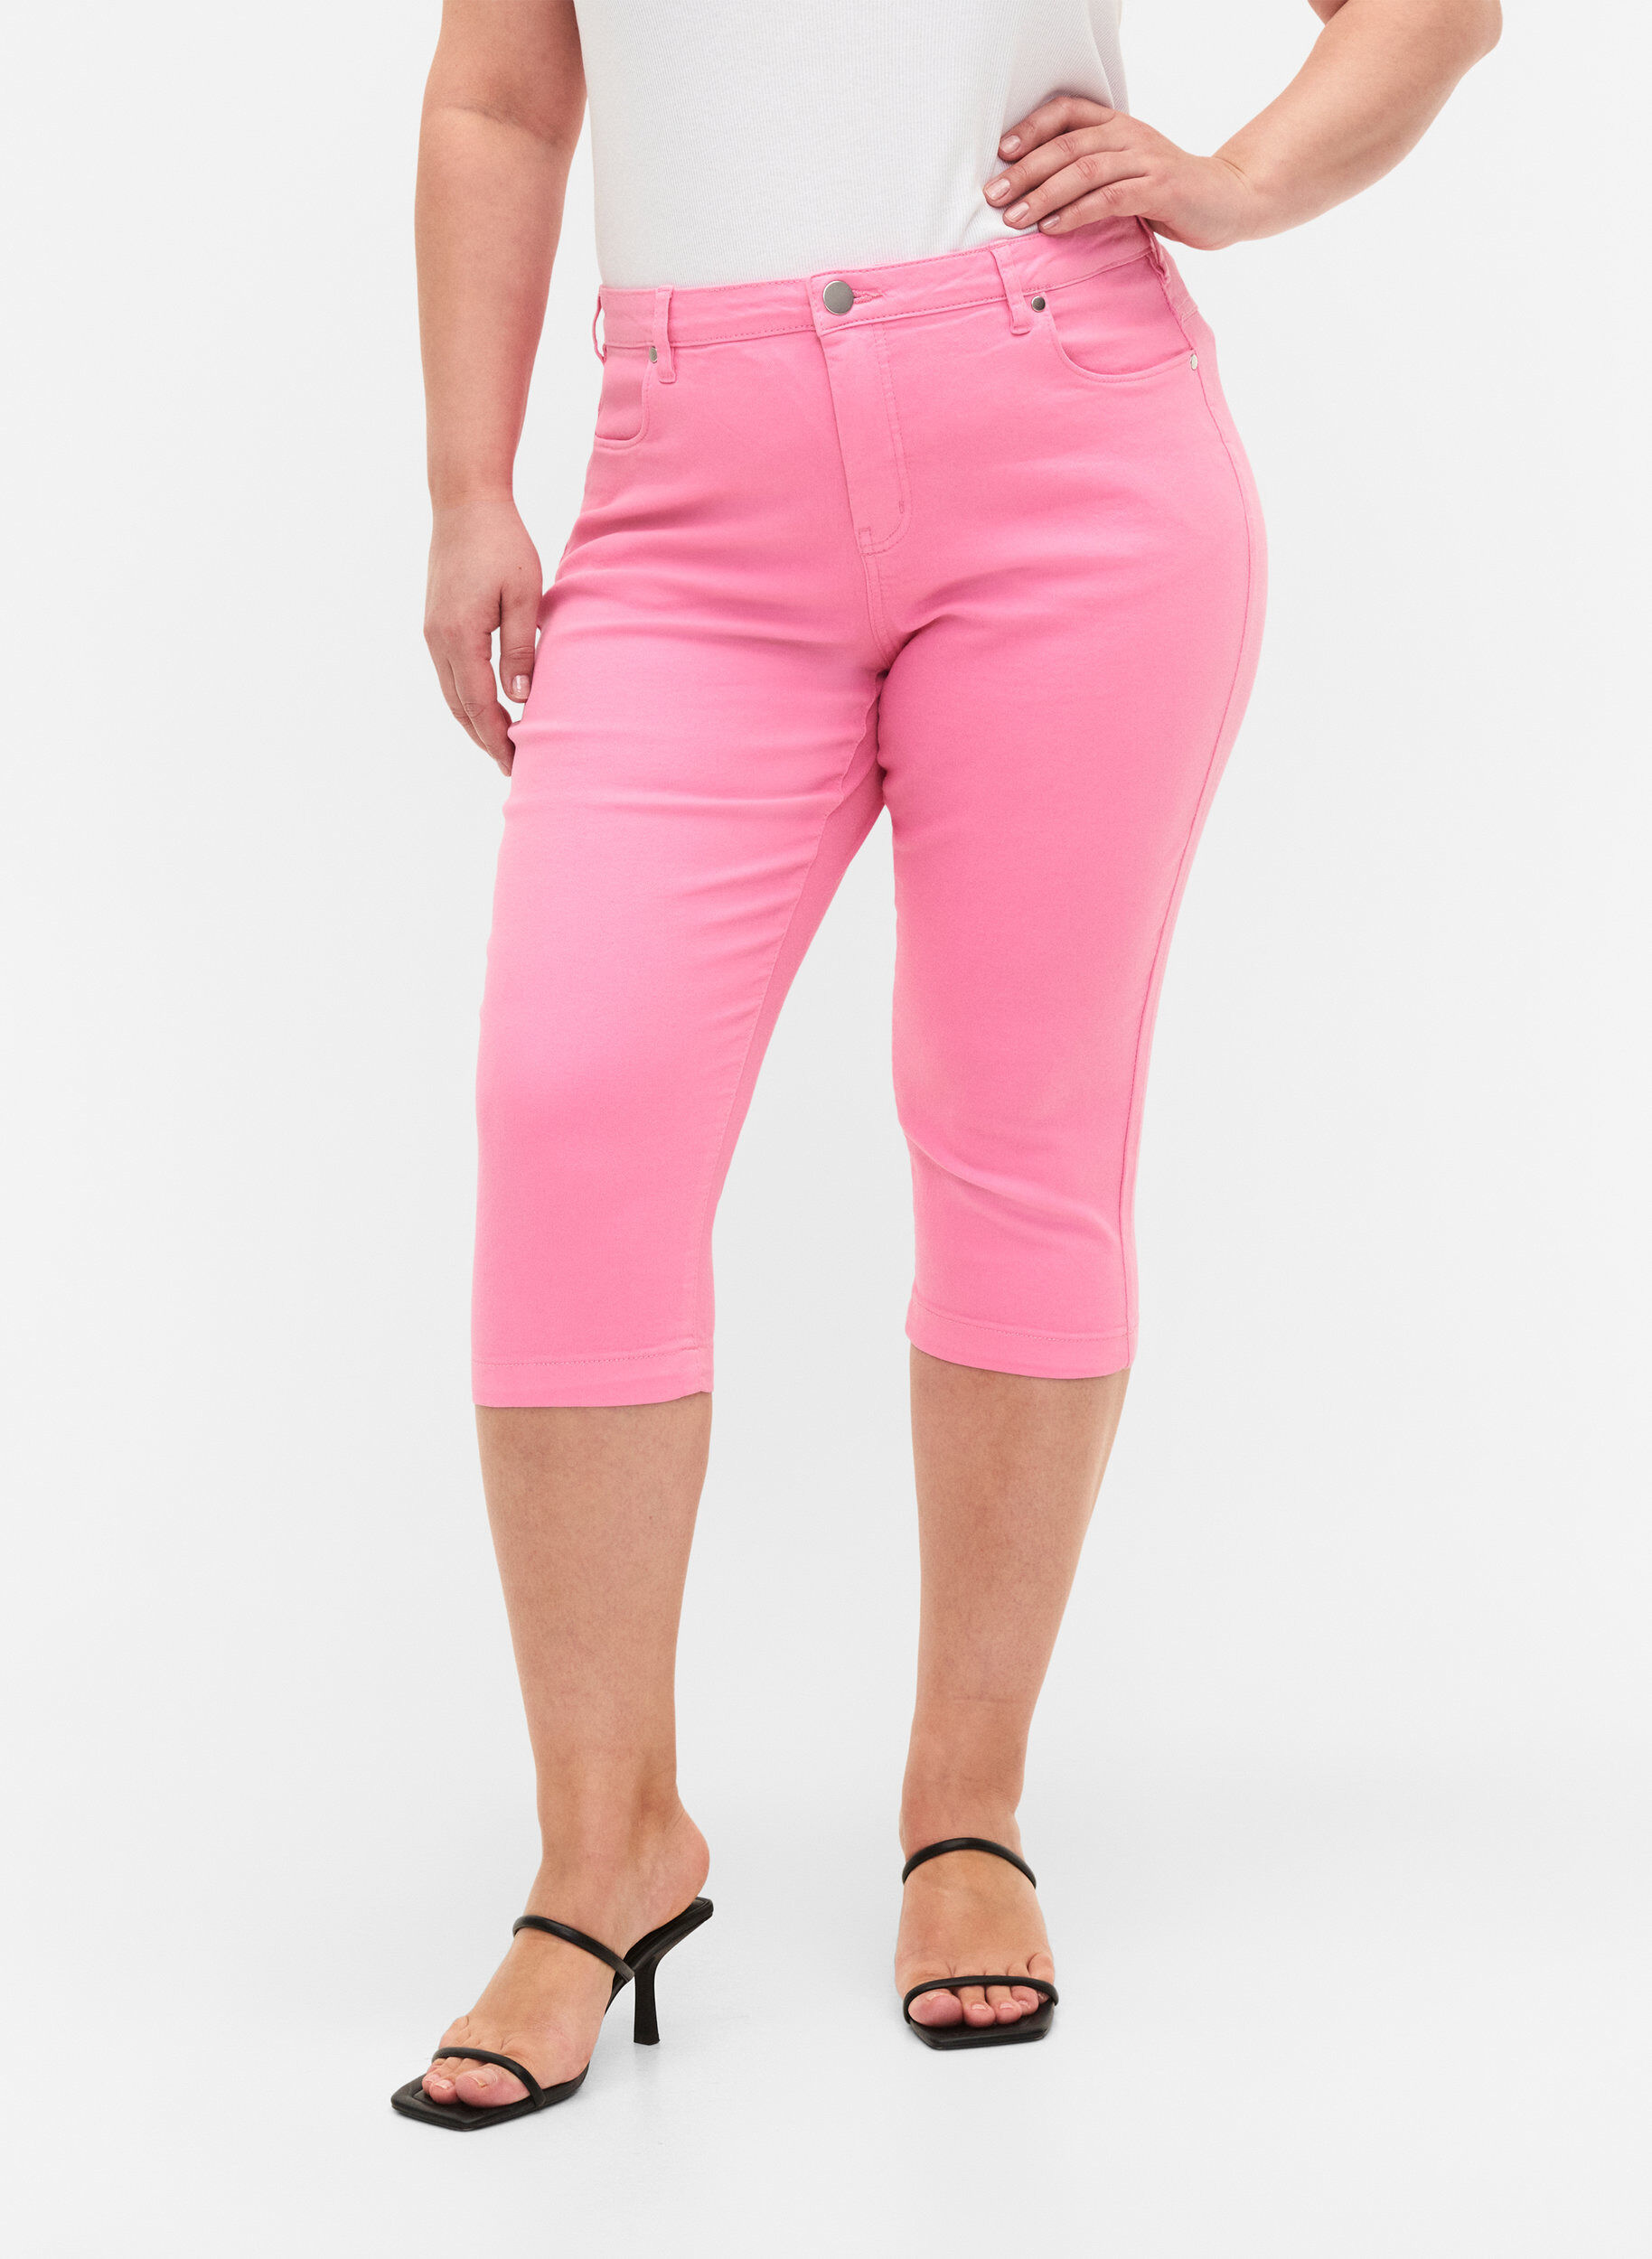 Buy Tight Pants, Skinny Fit Trousers With Pockets, for Ladies Online in  India - Etsy